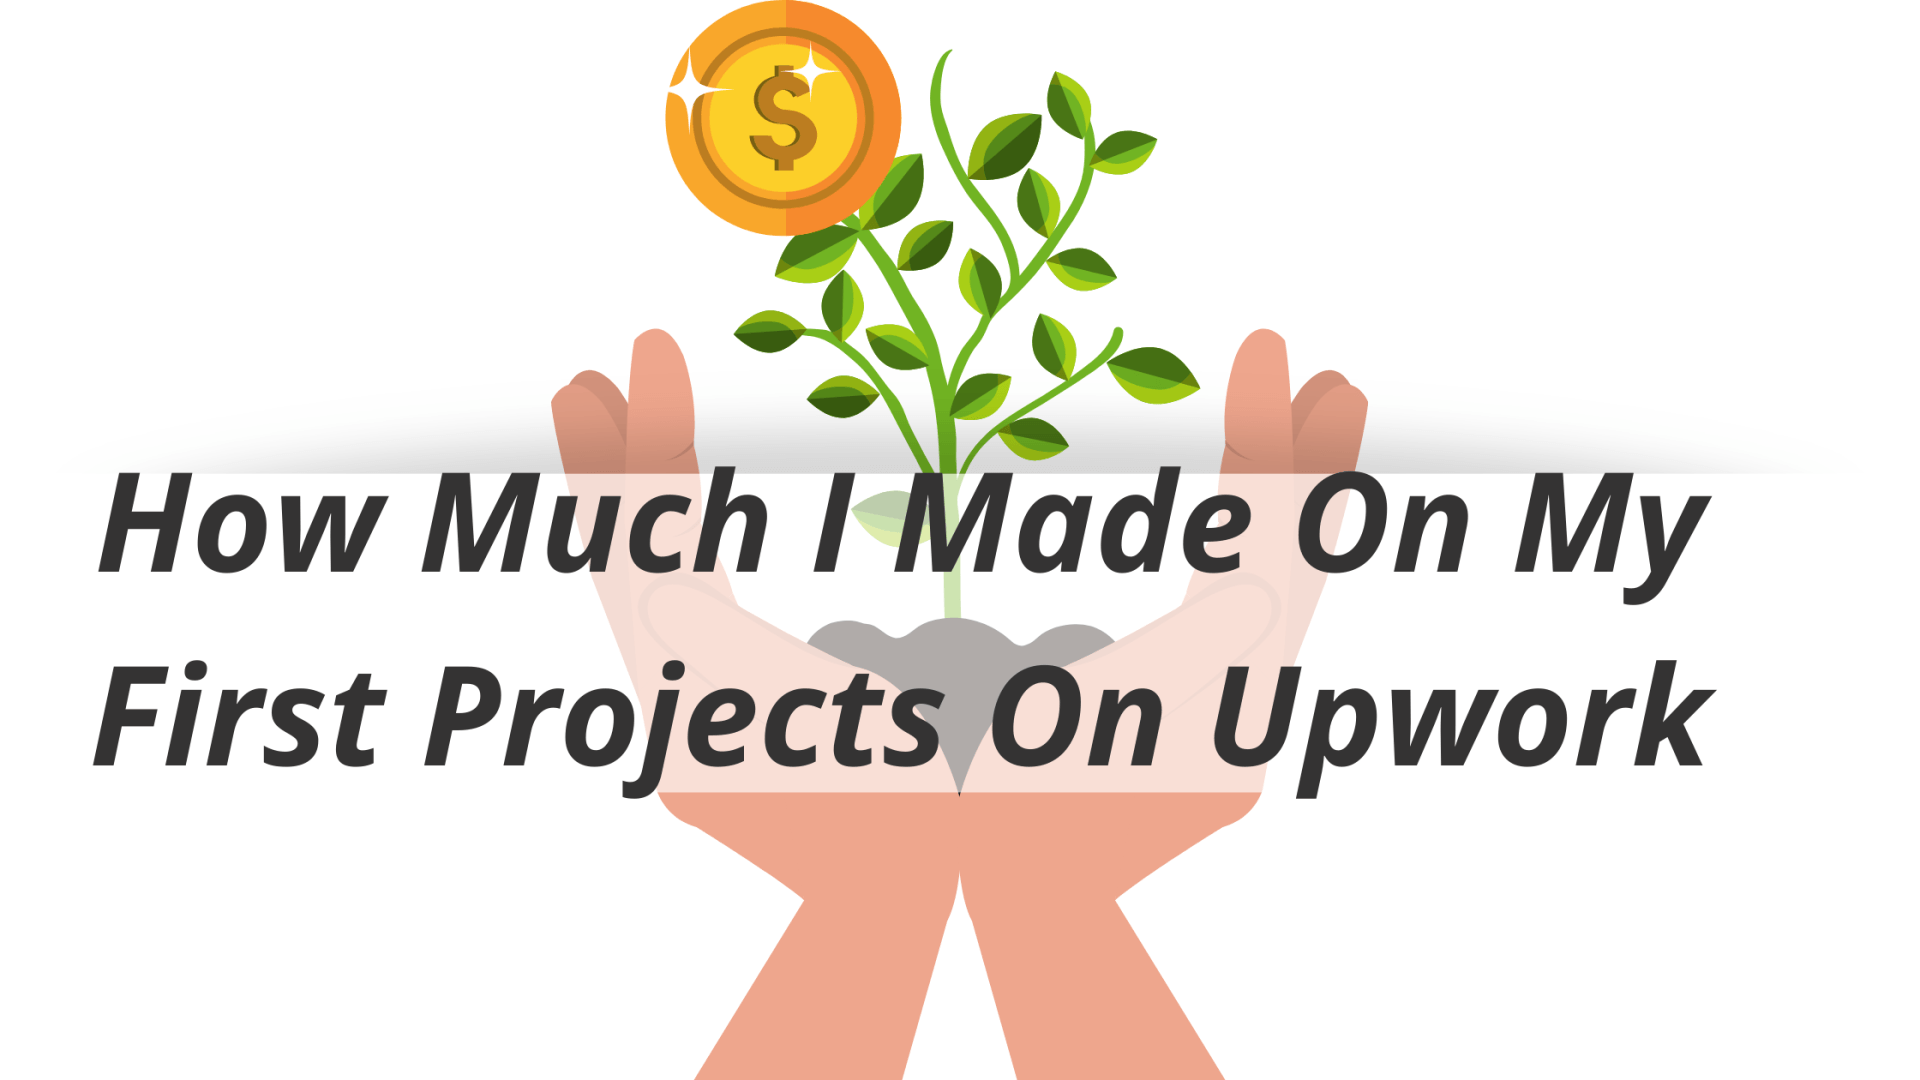 How Much I Made On My First Projects On Upwork